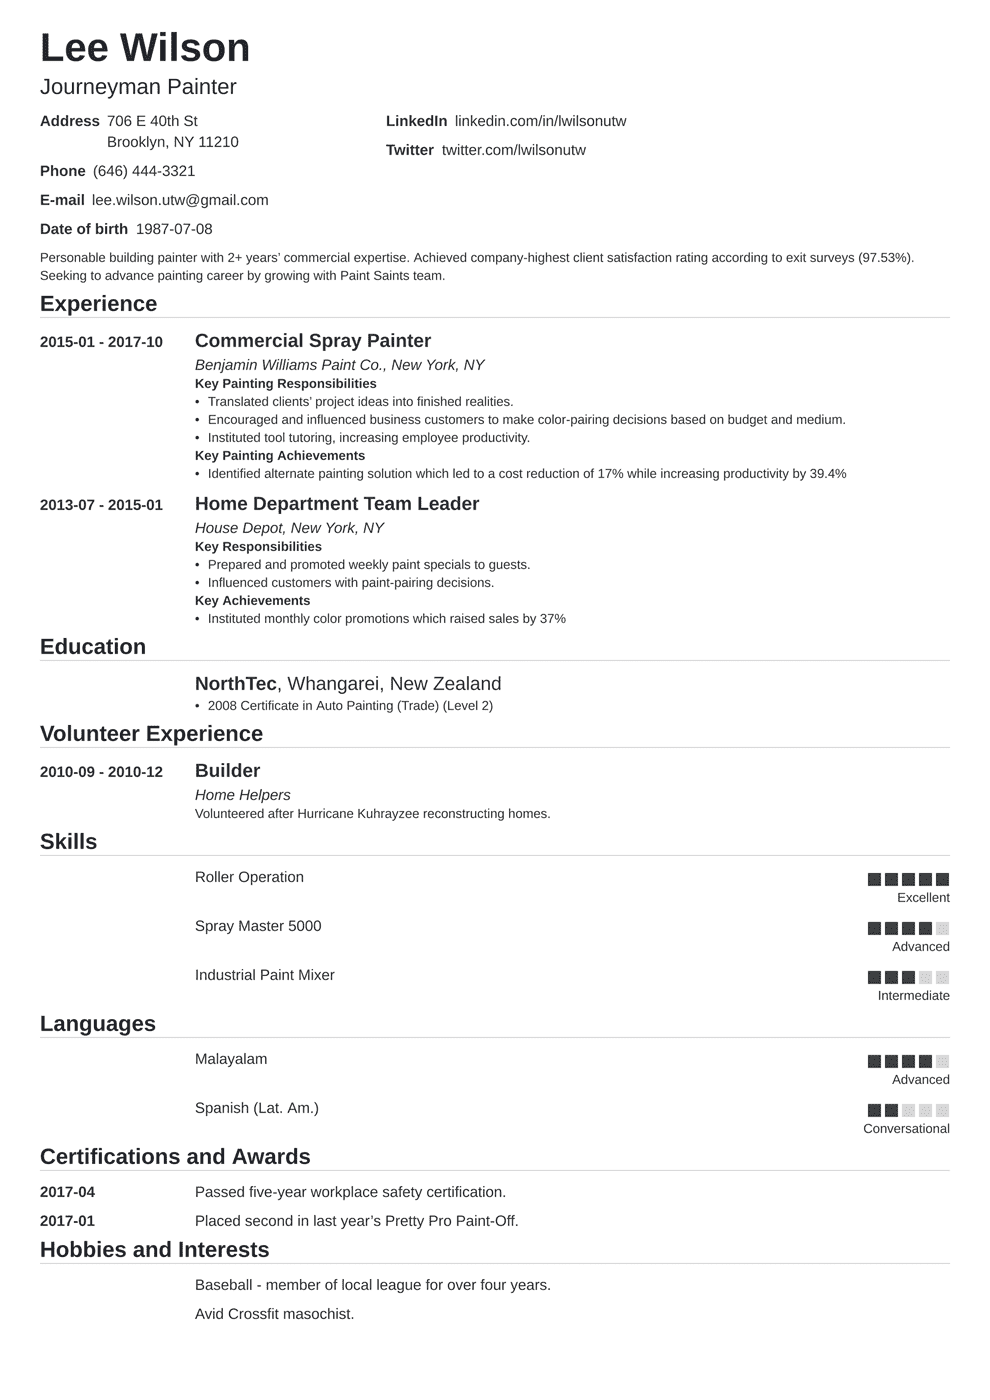 Painter Resume Sample [With Objective and Job Description]